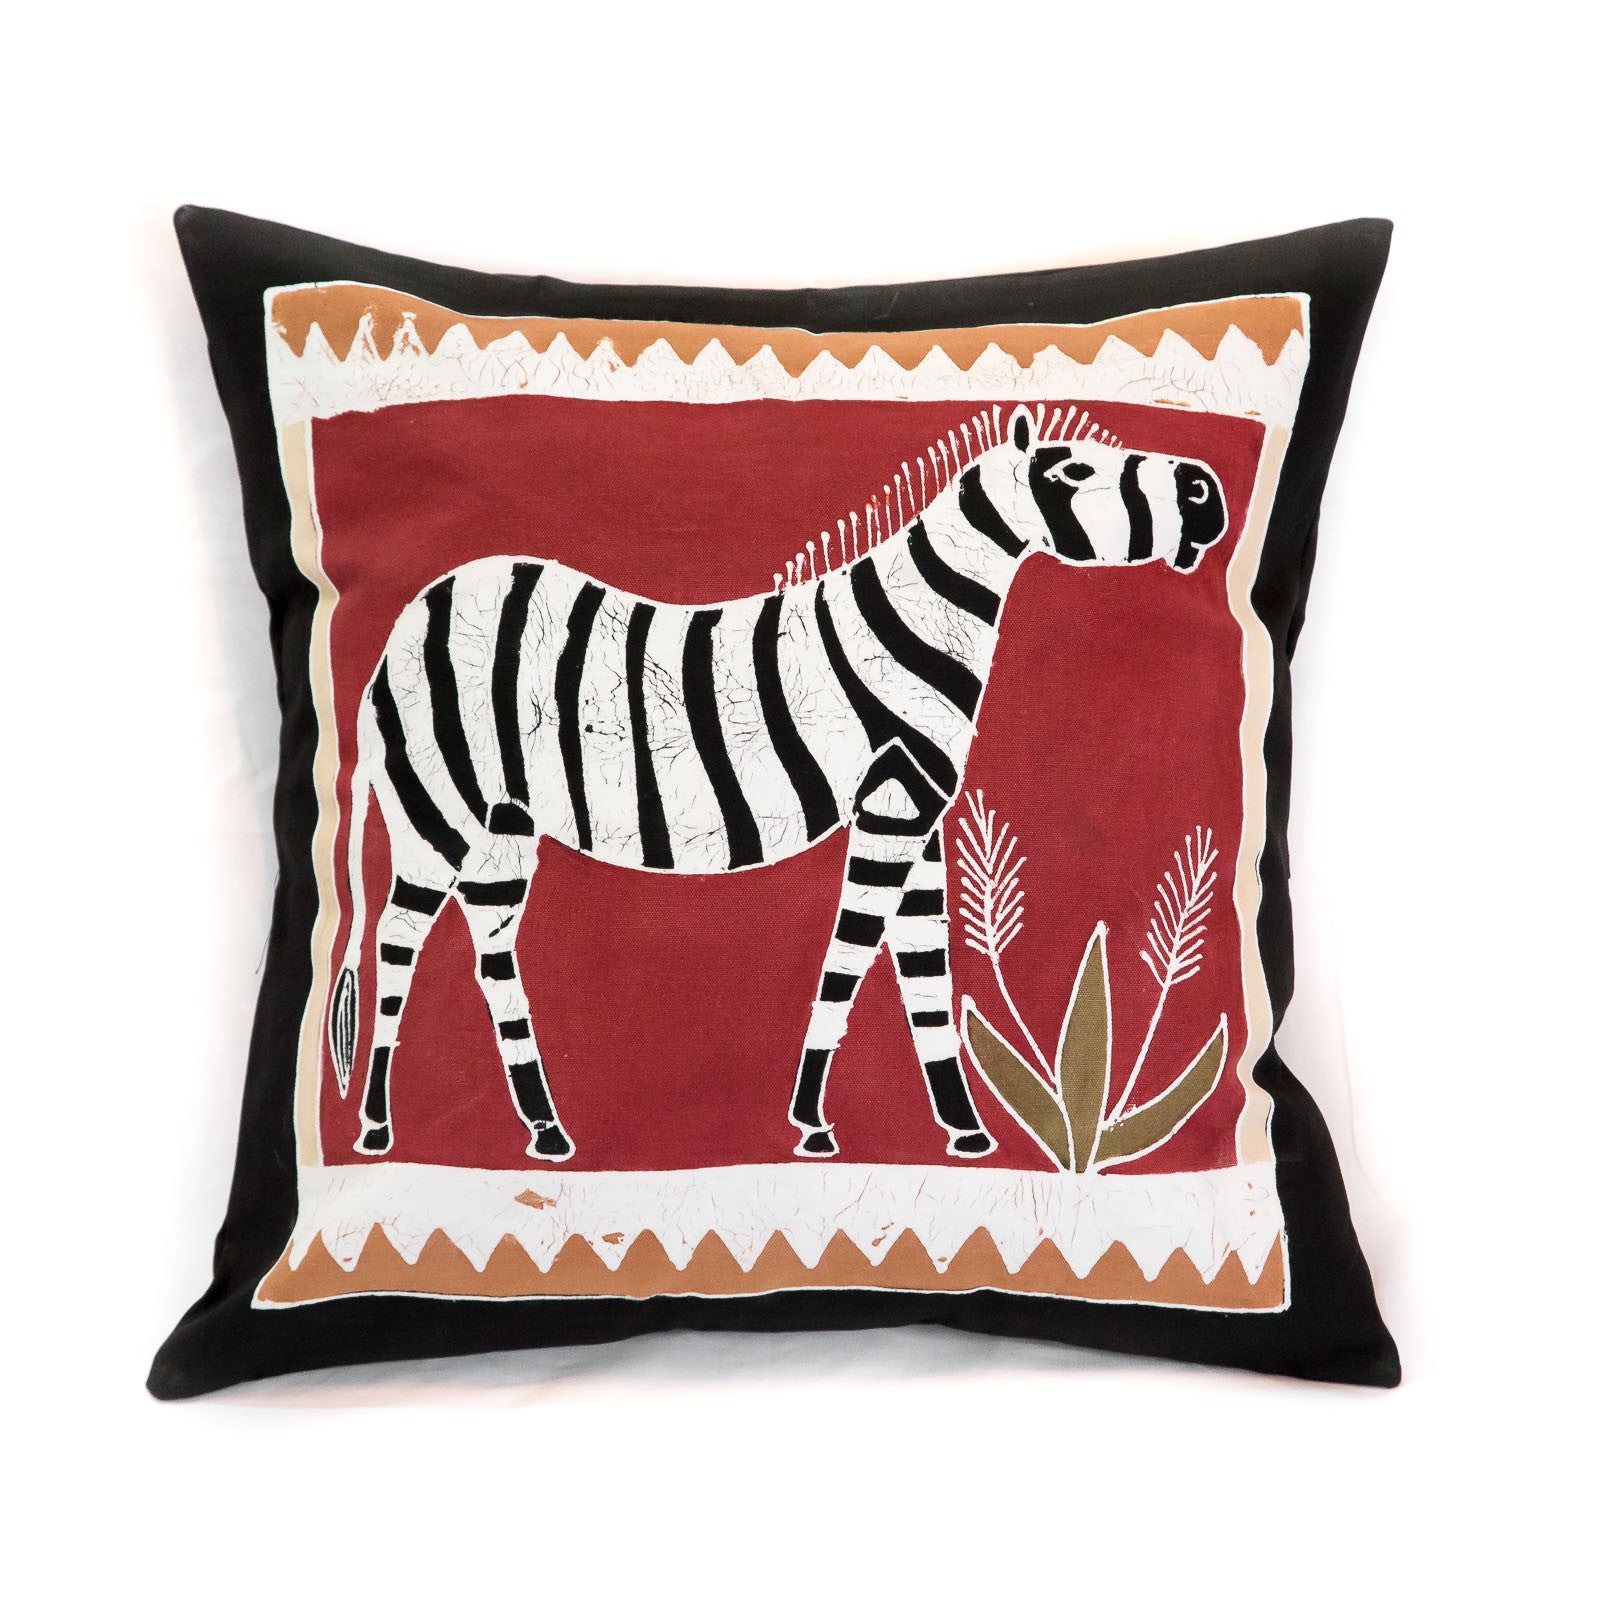 Safari inspired Zebra Bushways Cushion Cover - Hand Painted by TRIBAL TEXTILES - Handcrafted Home Decor Interiors